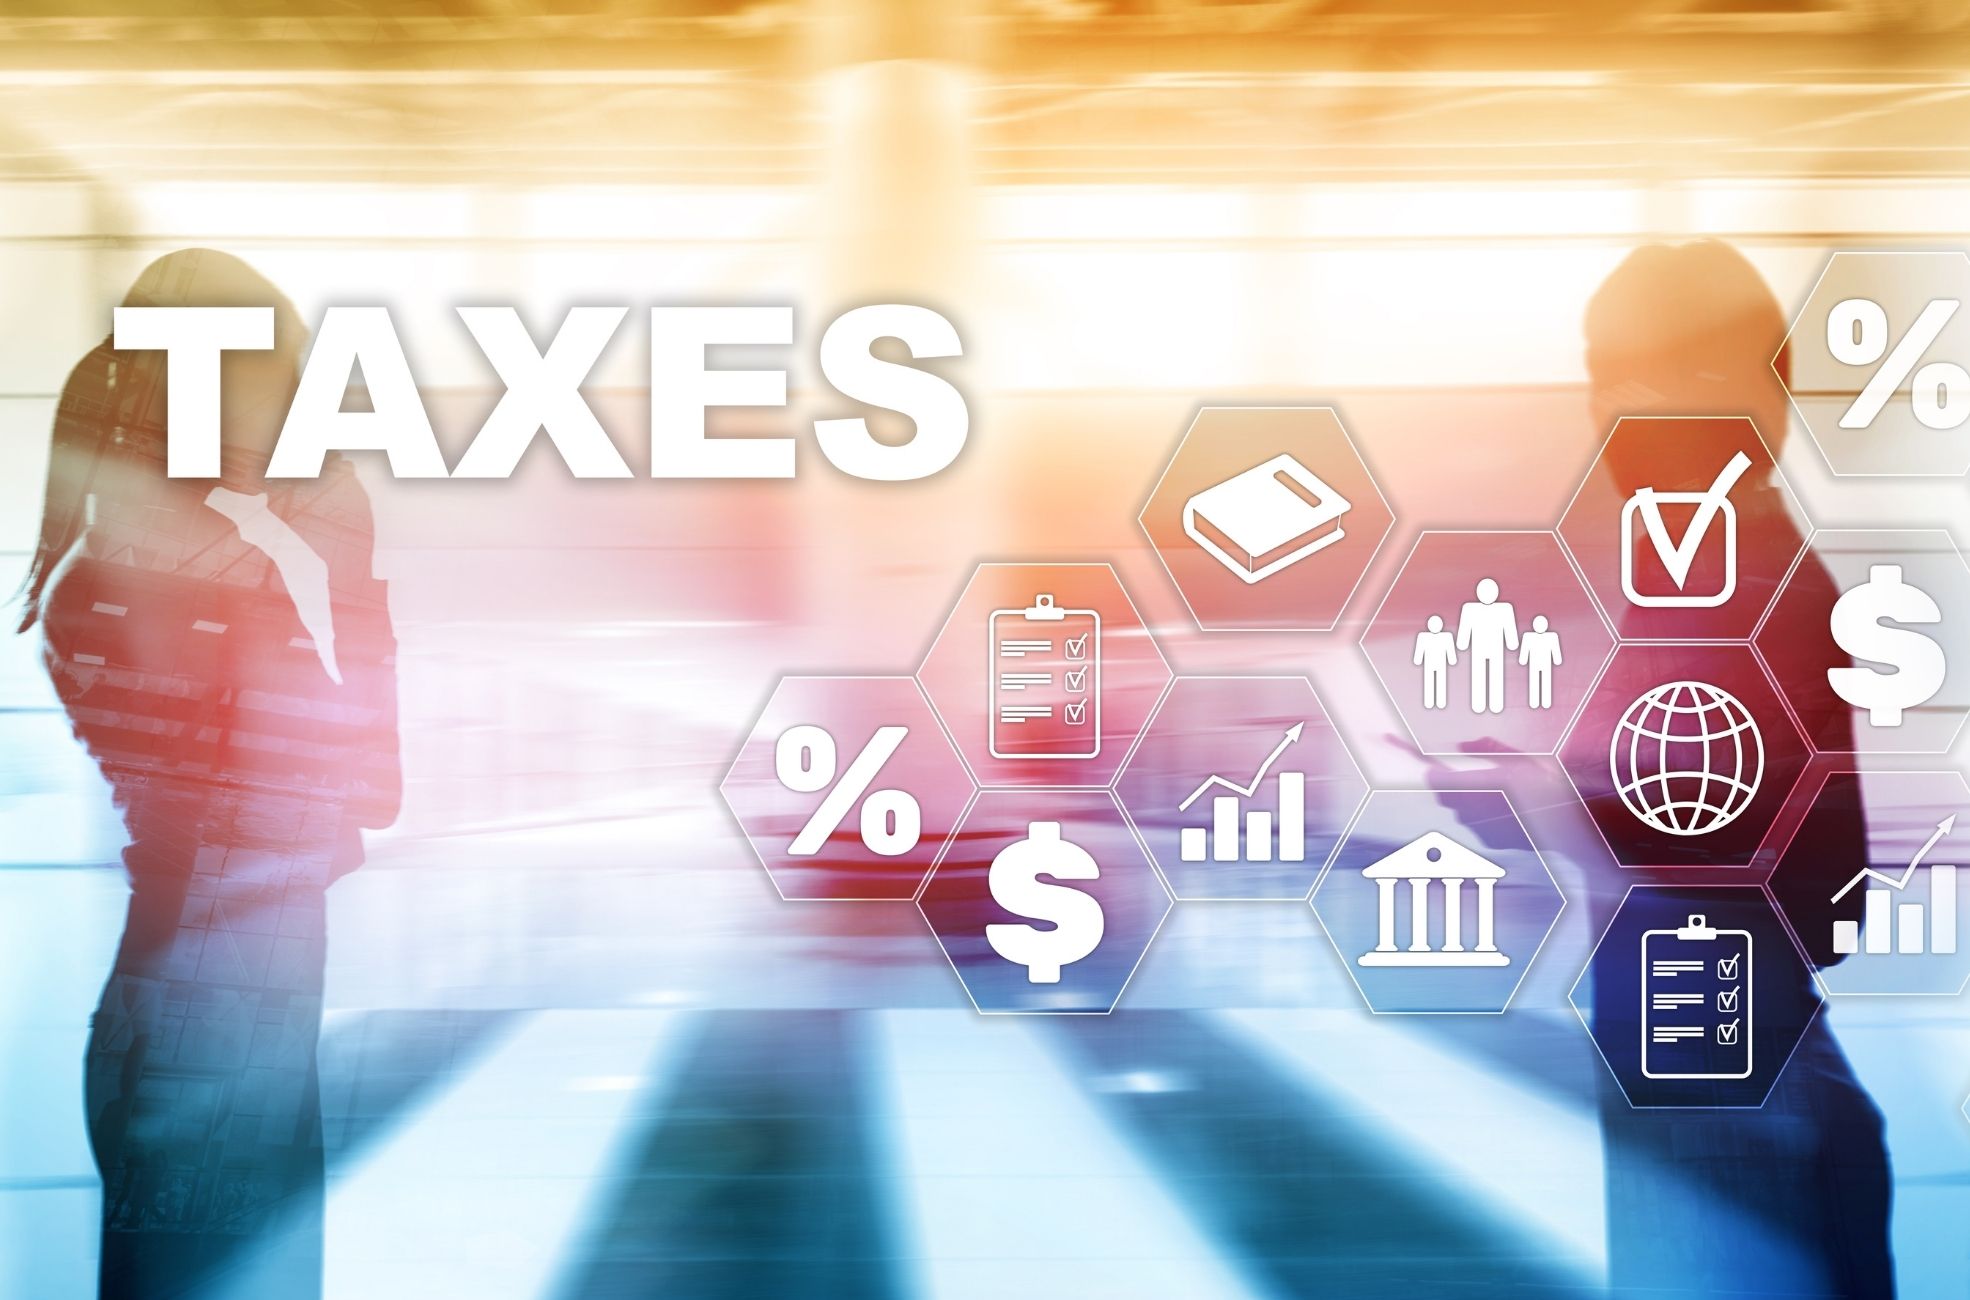 Illustration Of Taxes People And Symbols